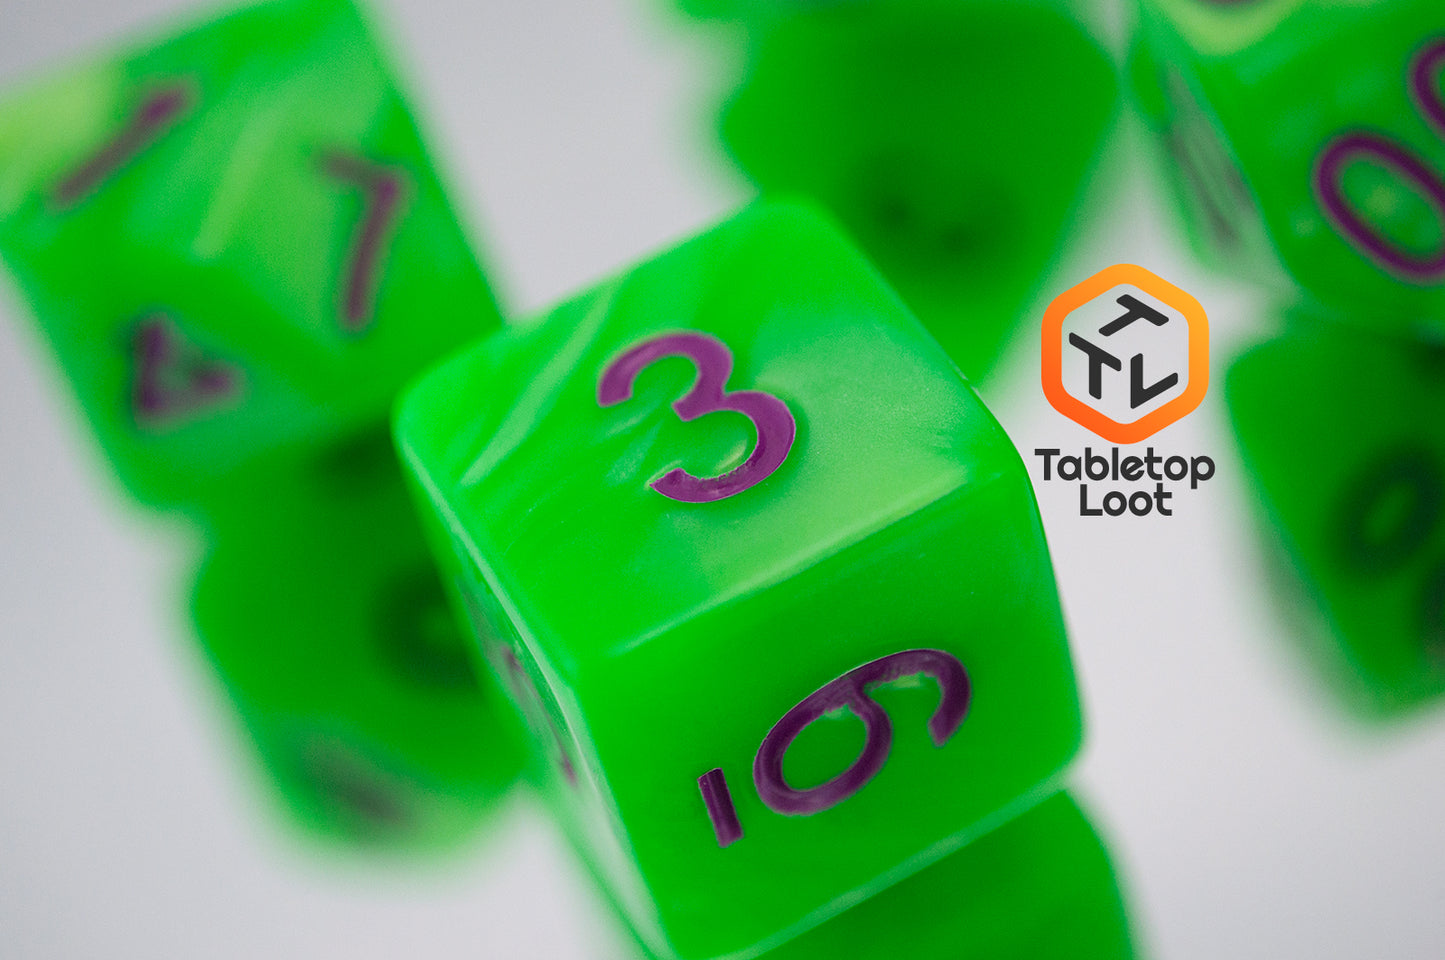 A close up of the D6 from the Radioactive Green 7 piece dice set from Tabletop Loot with bright green resin and purple numbering.